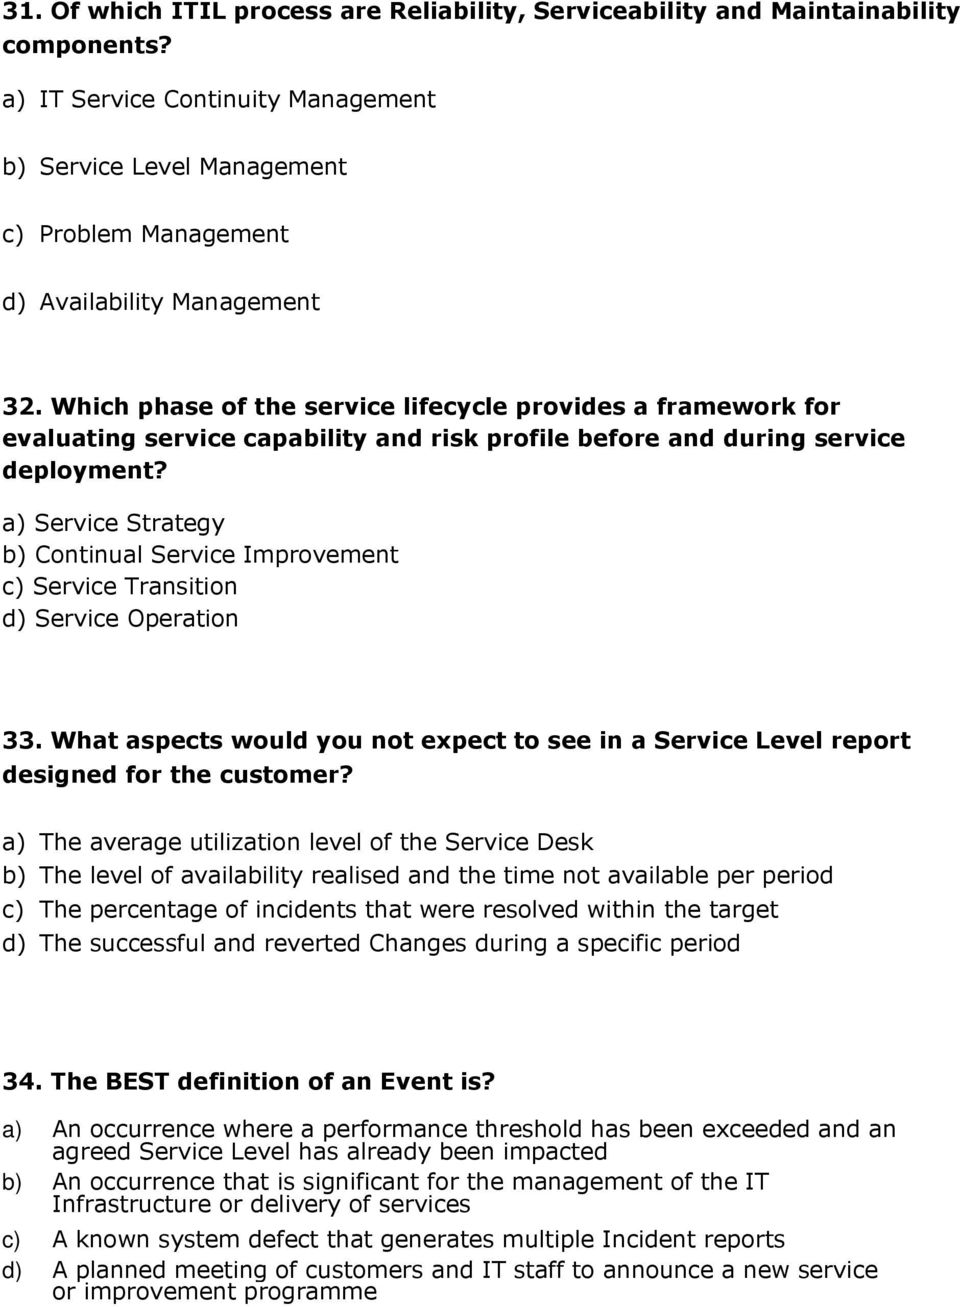 Which phase of the service lifecycle provides a framework for evaluating service capability and risk profile before and during service deployment?